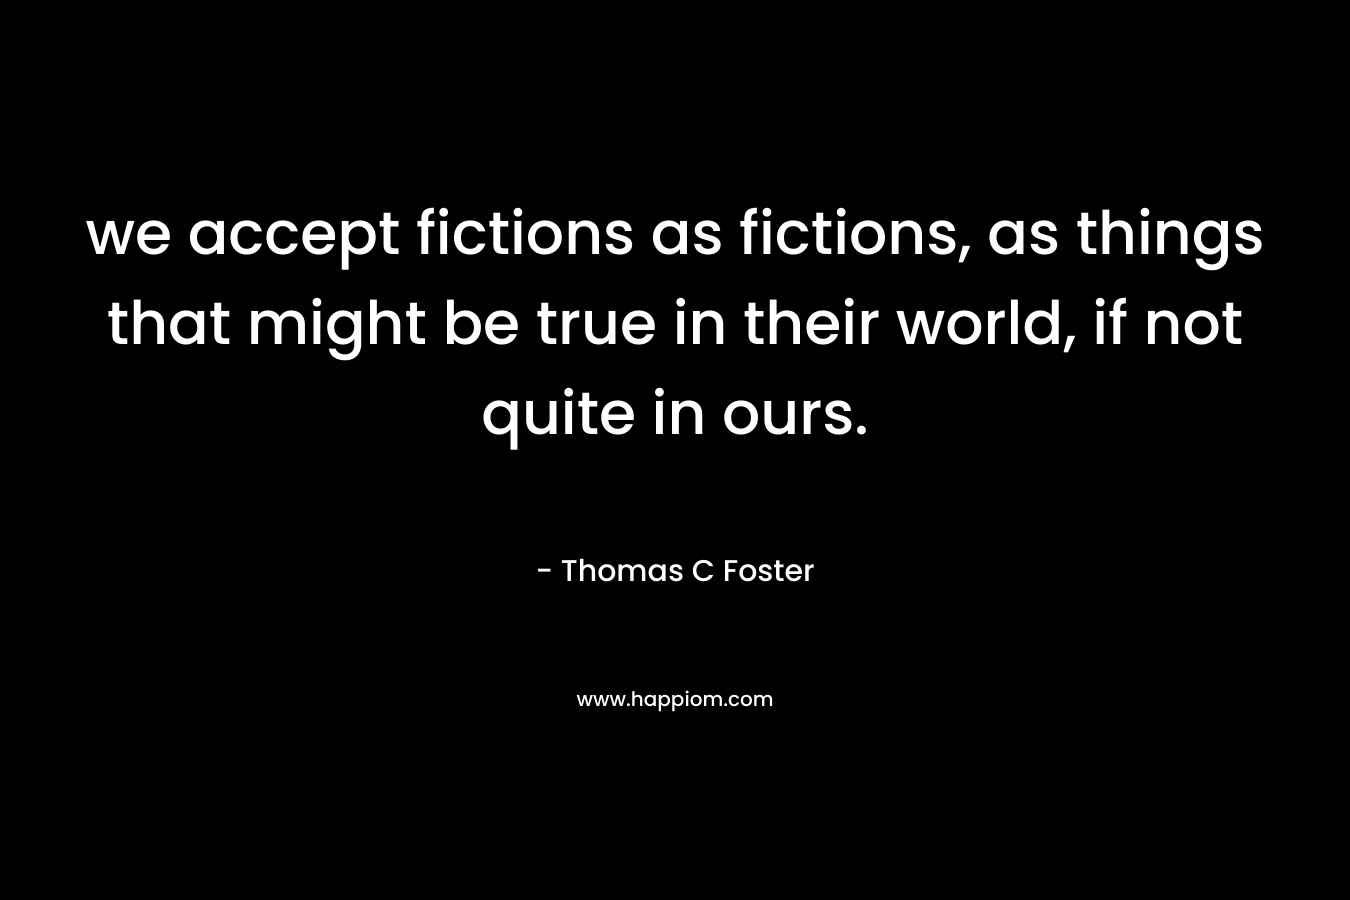 we accept fictions as fictions, as things that might be true in their world, if not quite in ours. – Thomas C Foster